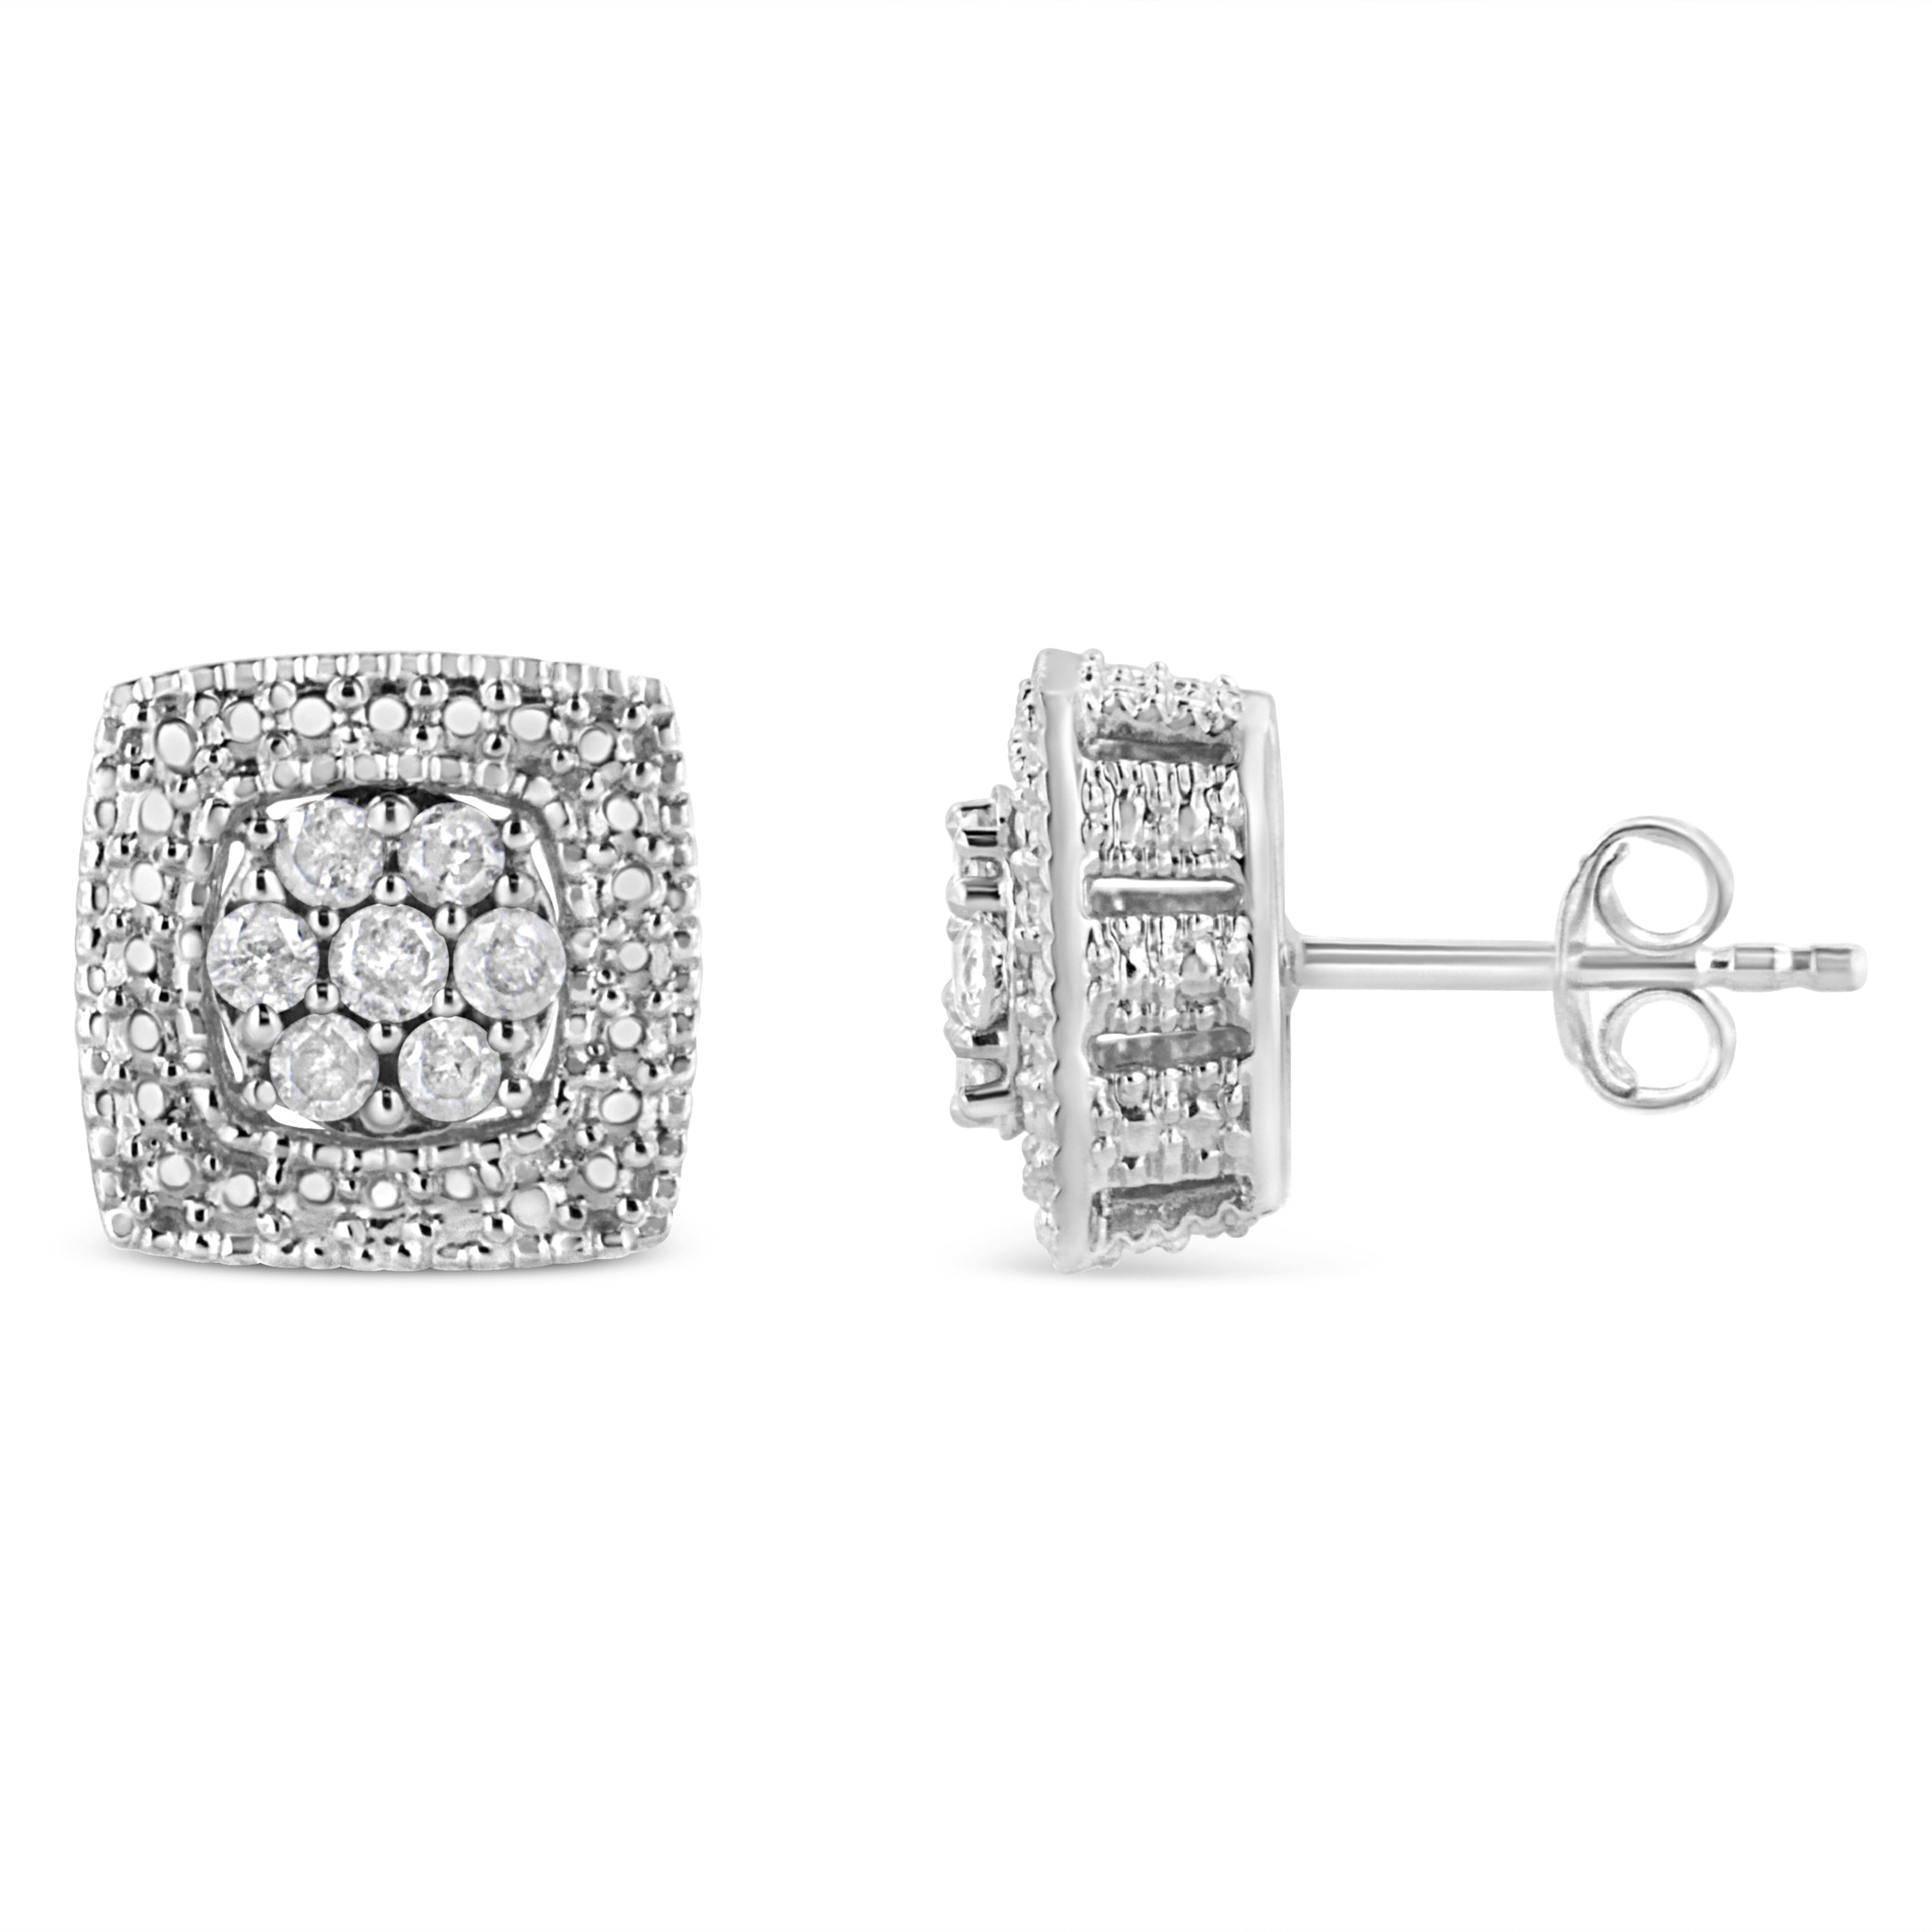 Treat yourself to these elaborate .925 sterling silver miligrain studs. The outer layer of these square earrings are set with silver beads that outline a center design set with 7 sparkling, round-cut diamonds. These gorgeous studs have a total